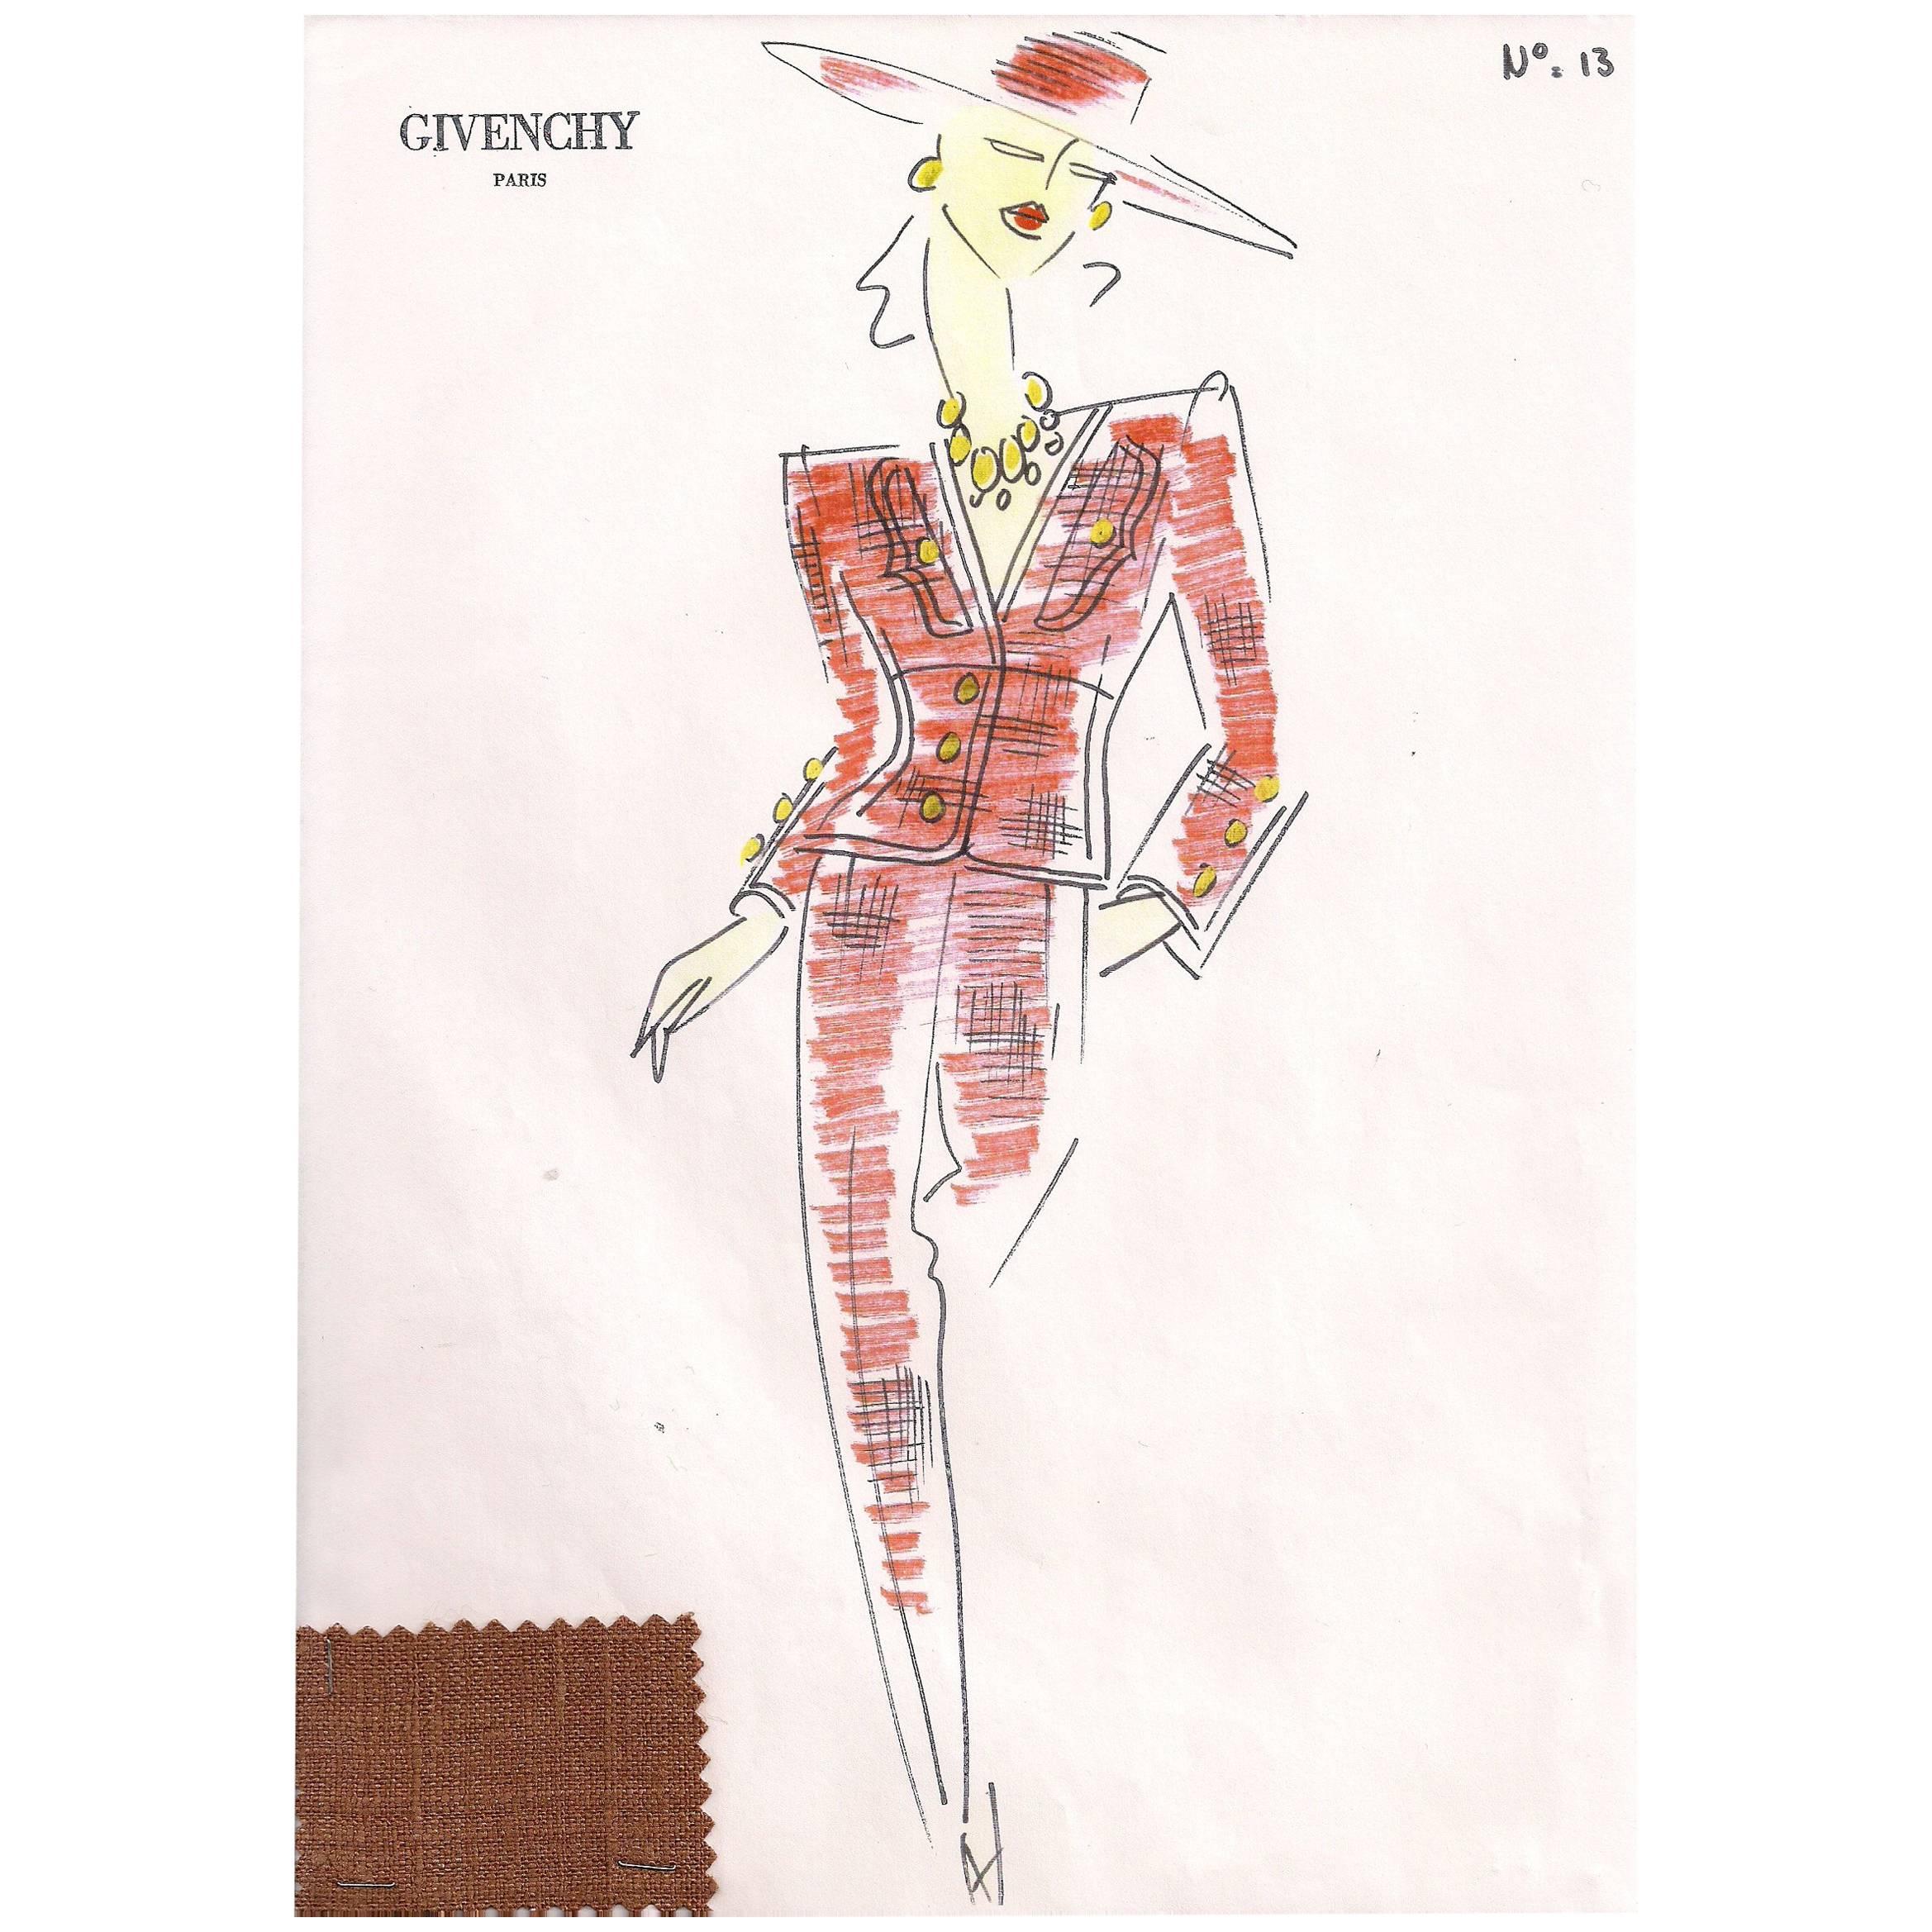 Givenchy Croquis of a Red Suit and Broad Brimmed Hat with Attached Fabric Sample